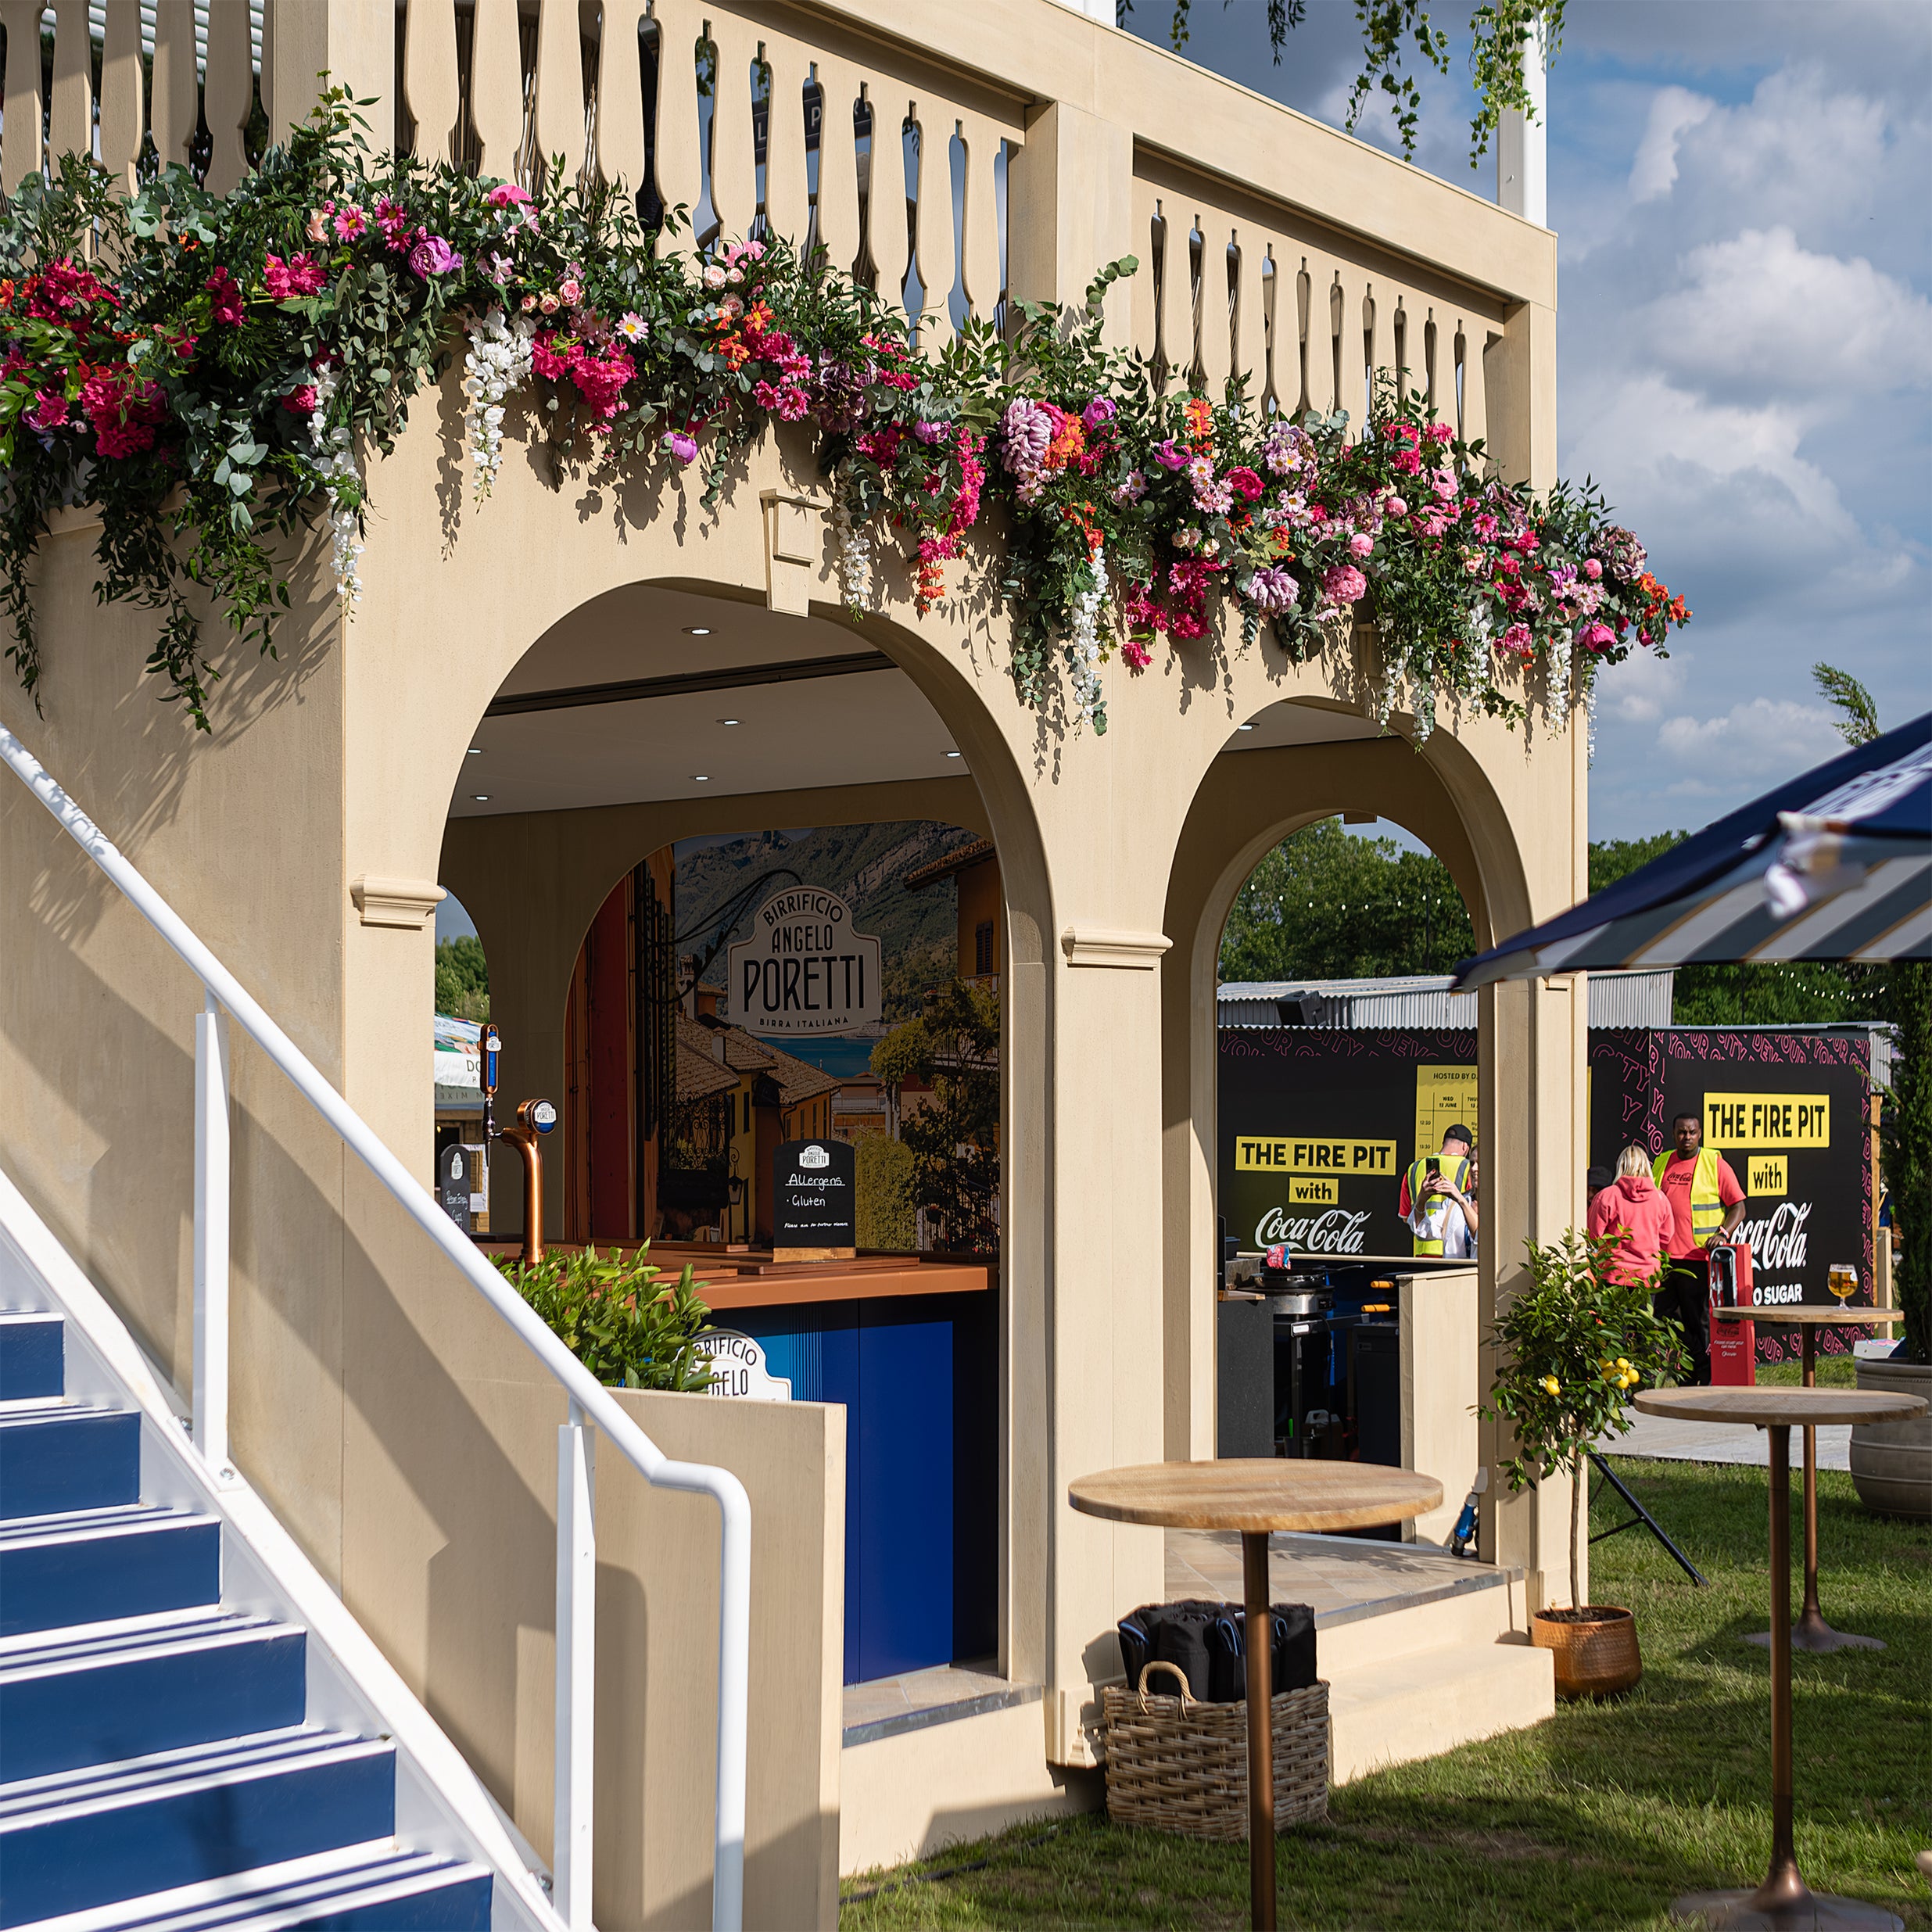 Angelo Poretti beer stand at Regent’s Park Taste Festival featuring floral decor for events by florist Amaranté London. The floral decorations for this stand include arches adorned with vibrant fresh flowers and green foliage, wicker seating, and blue awnings.